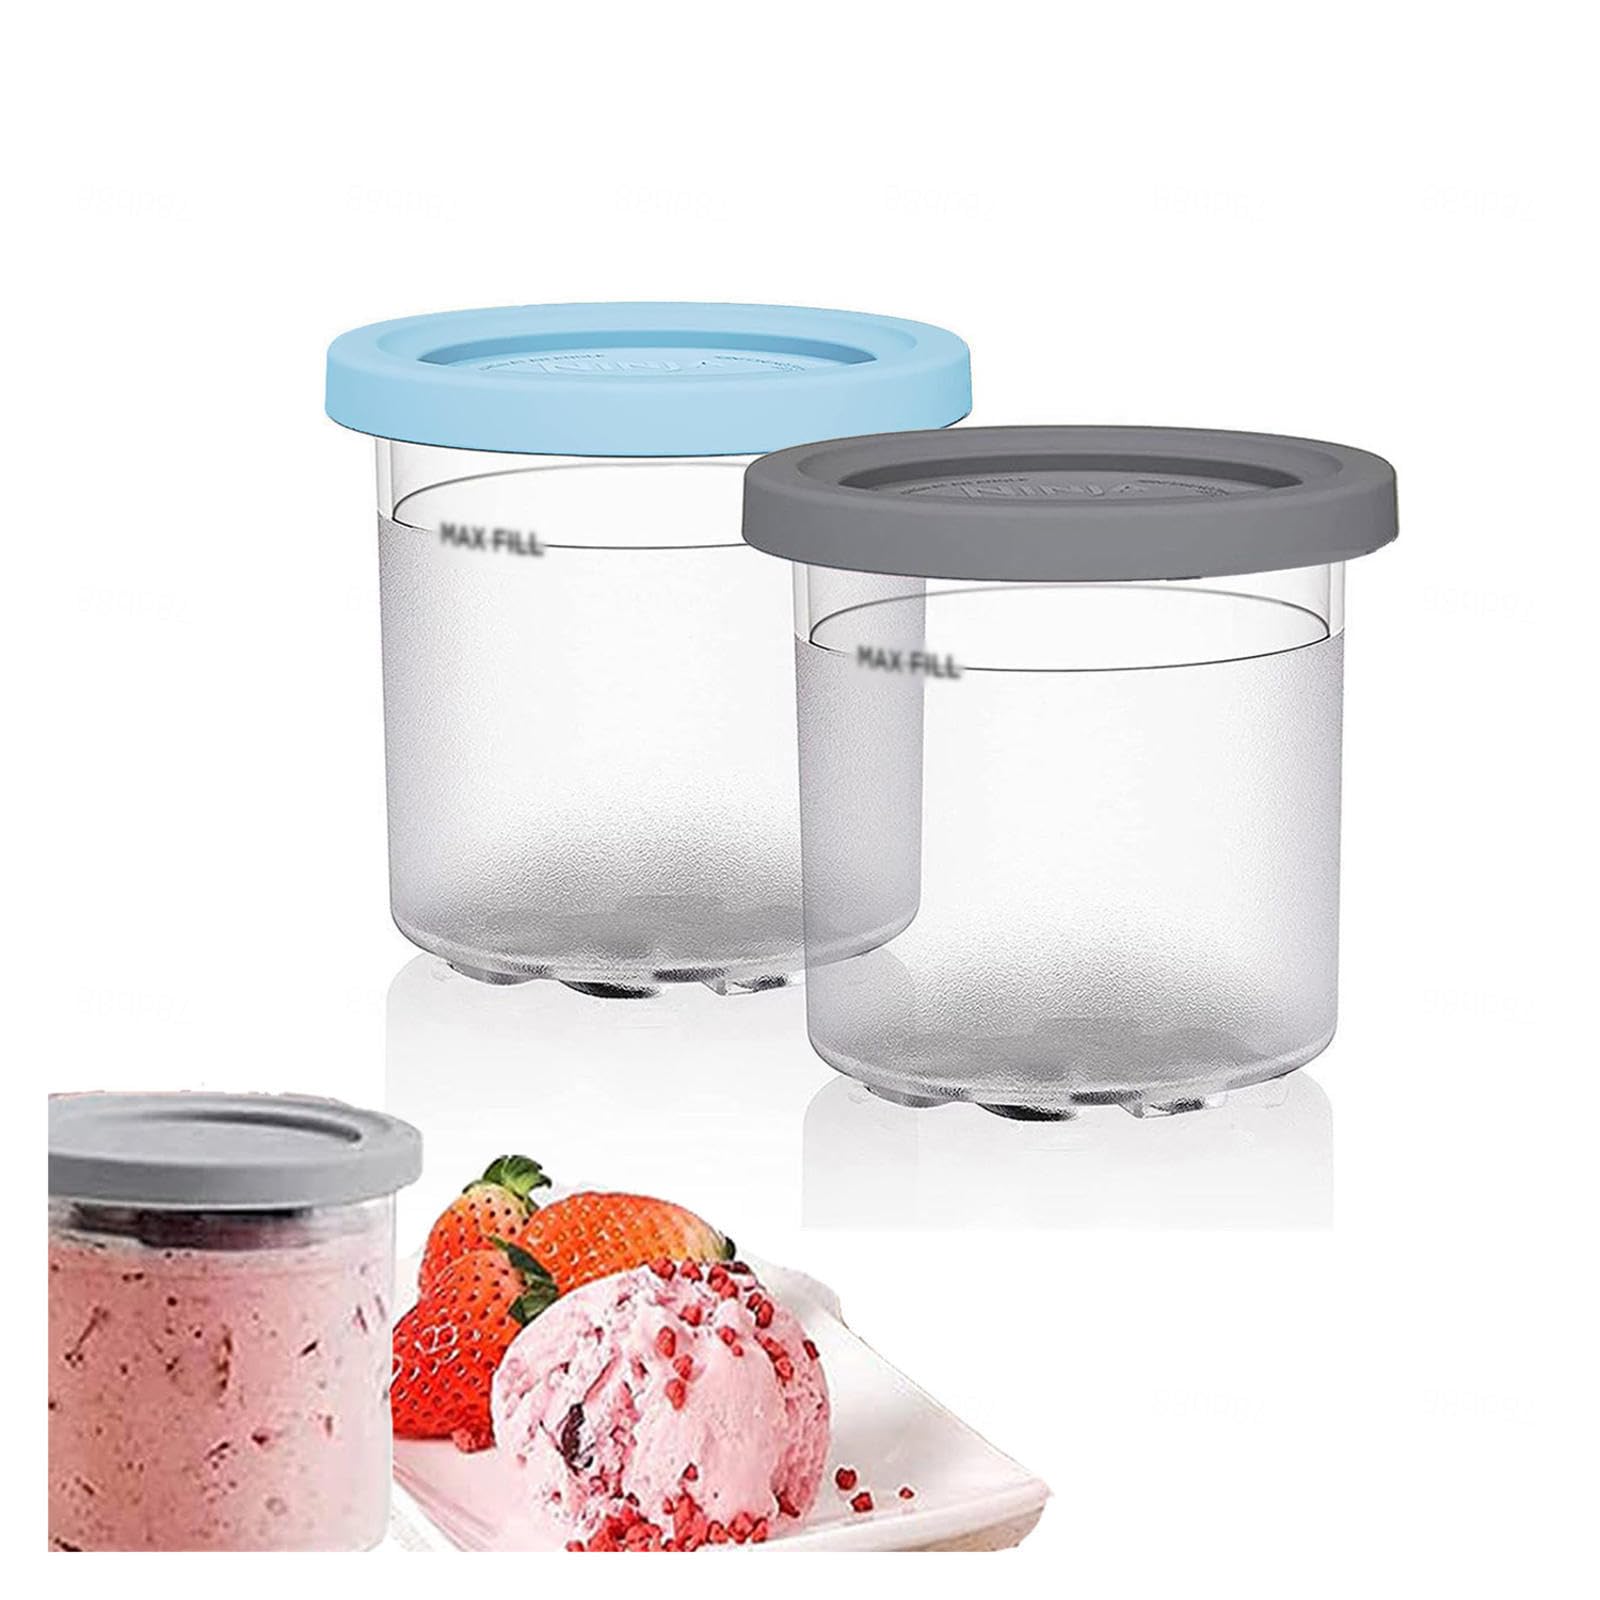 EVANEM 2/4/6PCS Creami Deluxe Pints, for Ninja Kitchen Creami,16 OZ Pint Ice Cream Containers Airtight and Leaf-Proof Compatible NC301 NC300 NC299AMZ Series Ice Cream Maker,Gray+Blue-2PCS